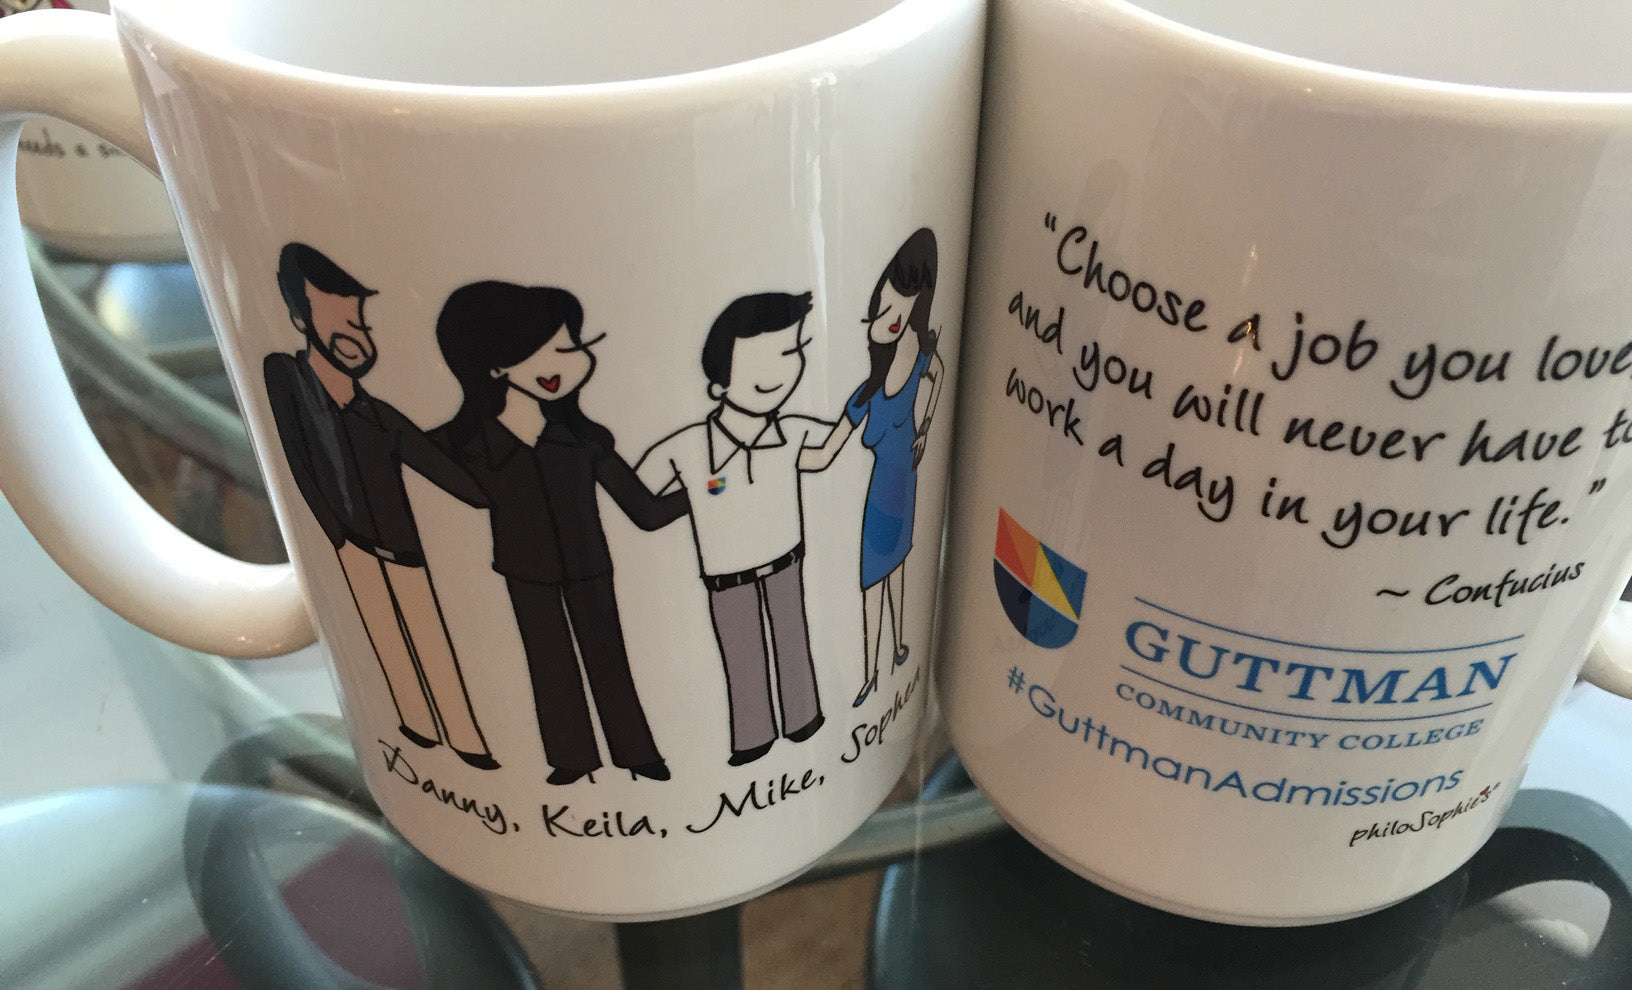 Custom Mugs - One-of-a-Kind philoSophie's Mugs for Coworkers, Friends, Family, and Teammates